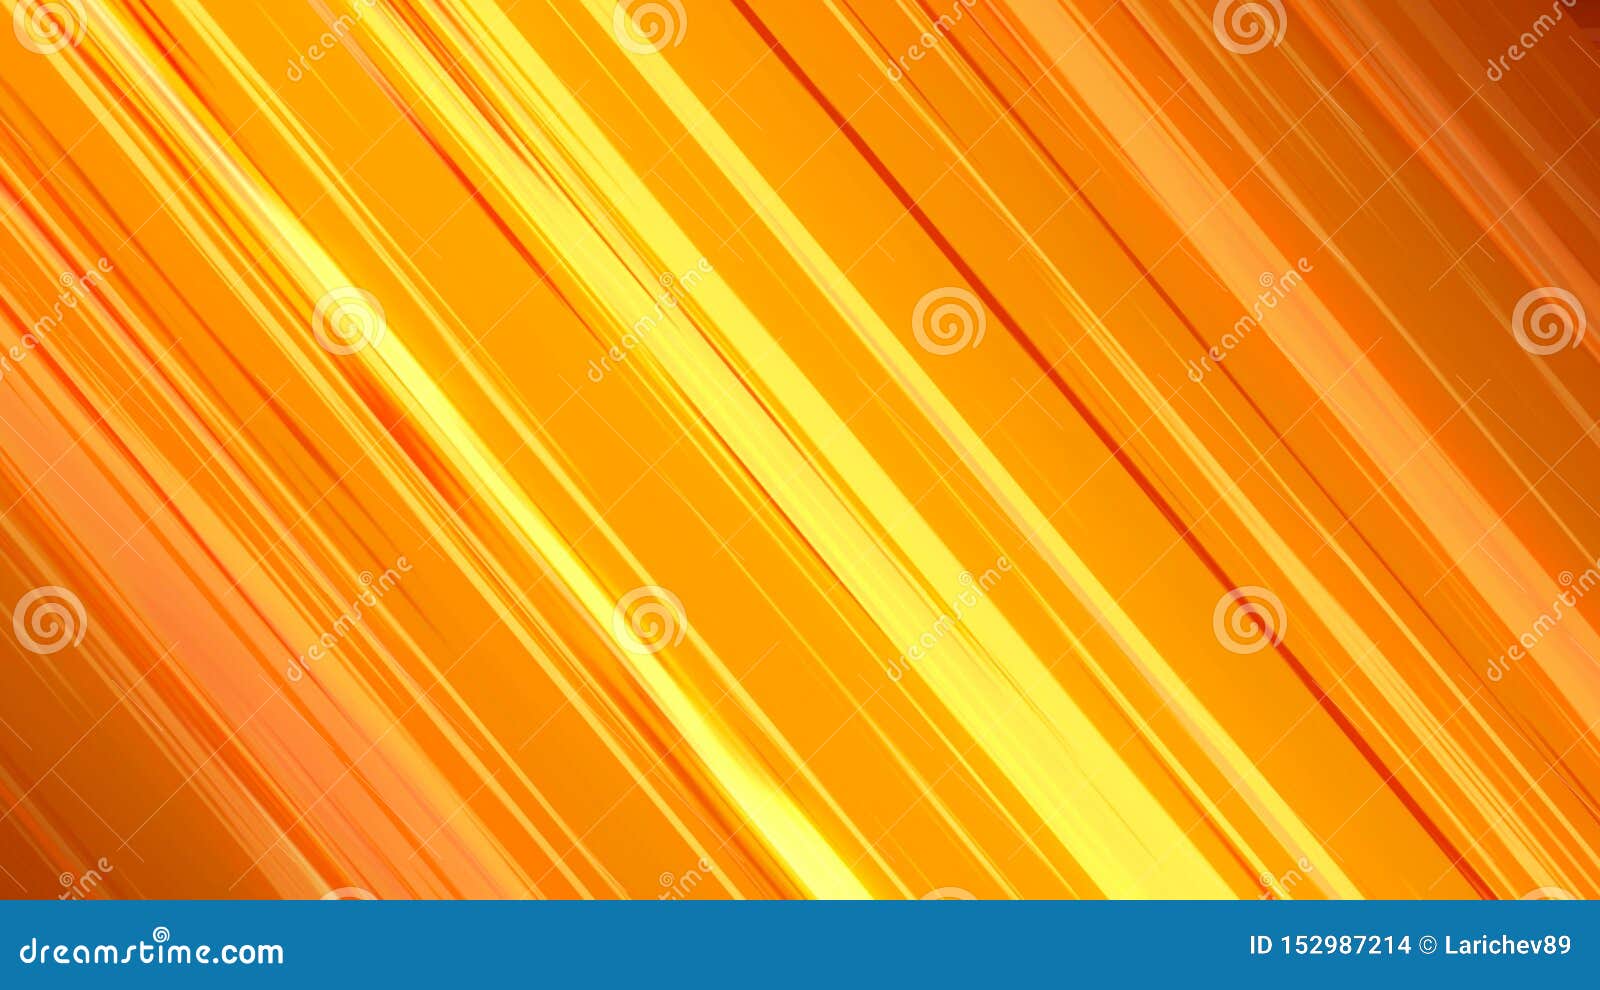 Abstract Background With Orange Speed Lines  3d Rendering 